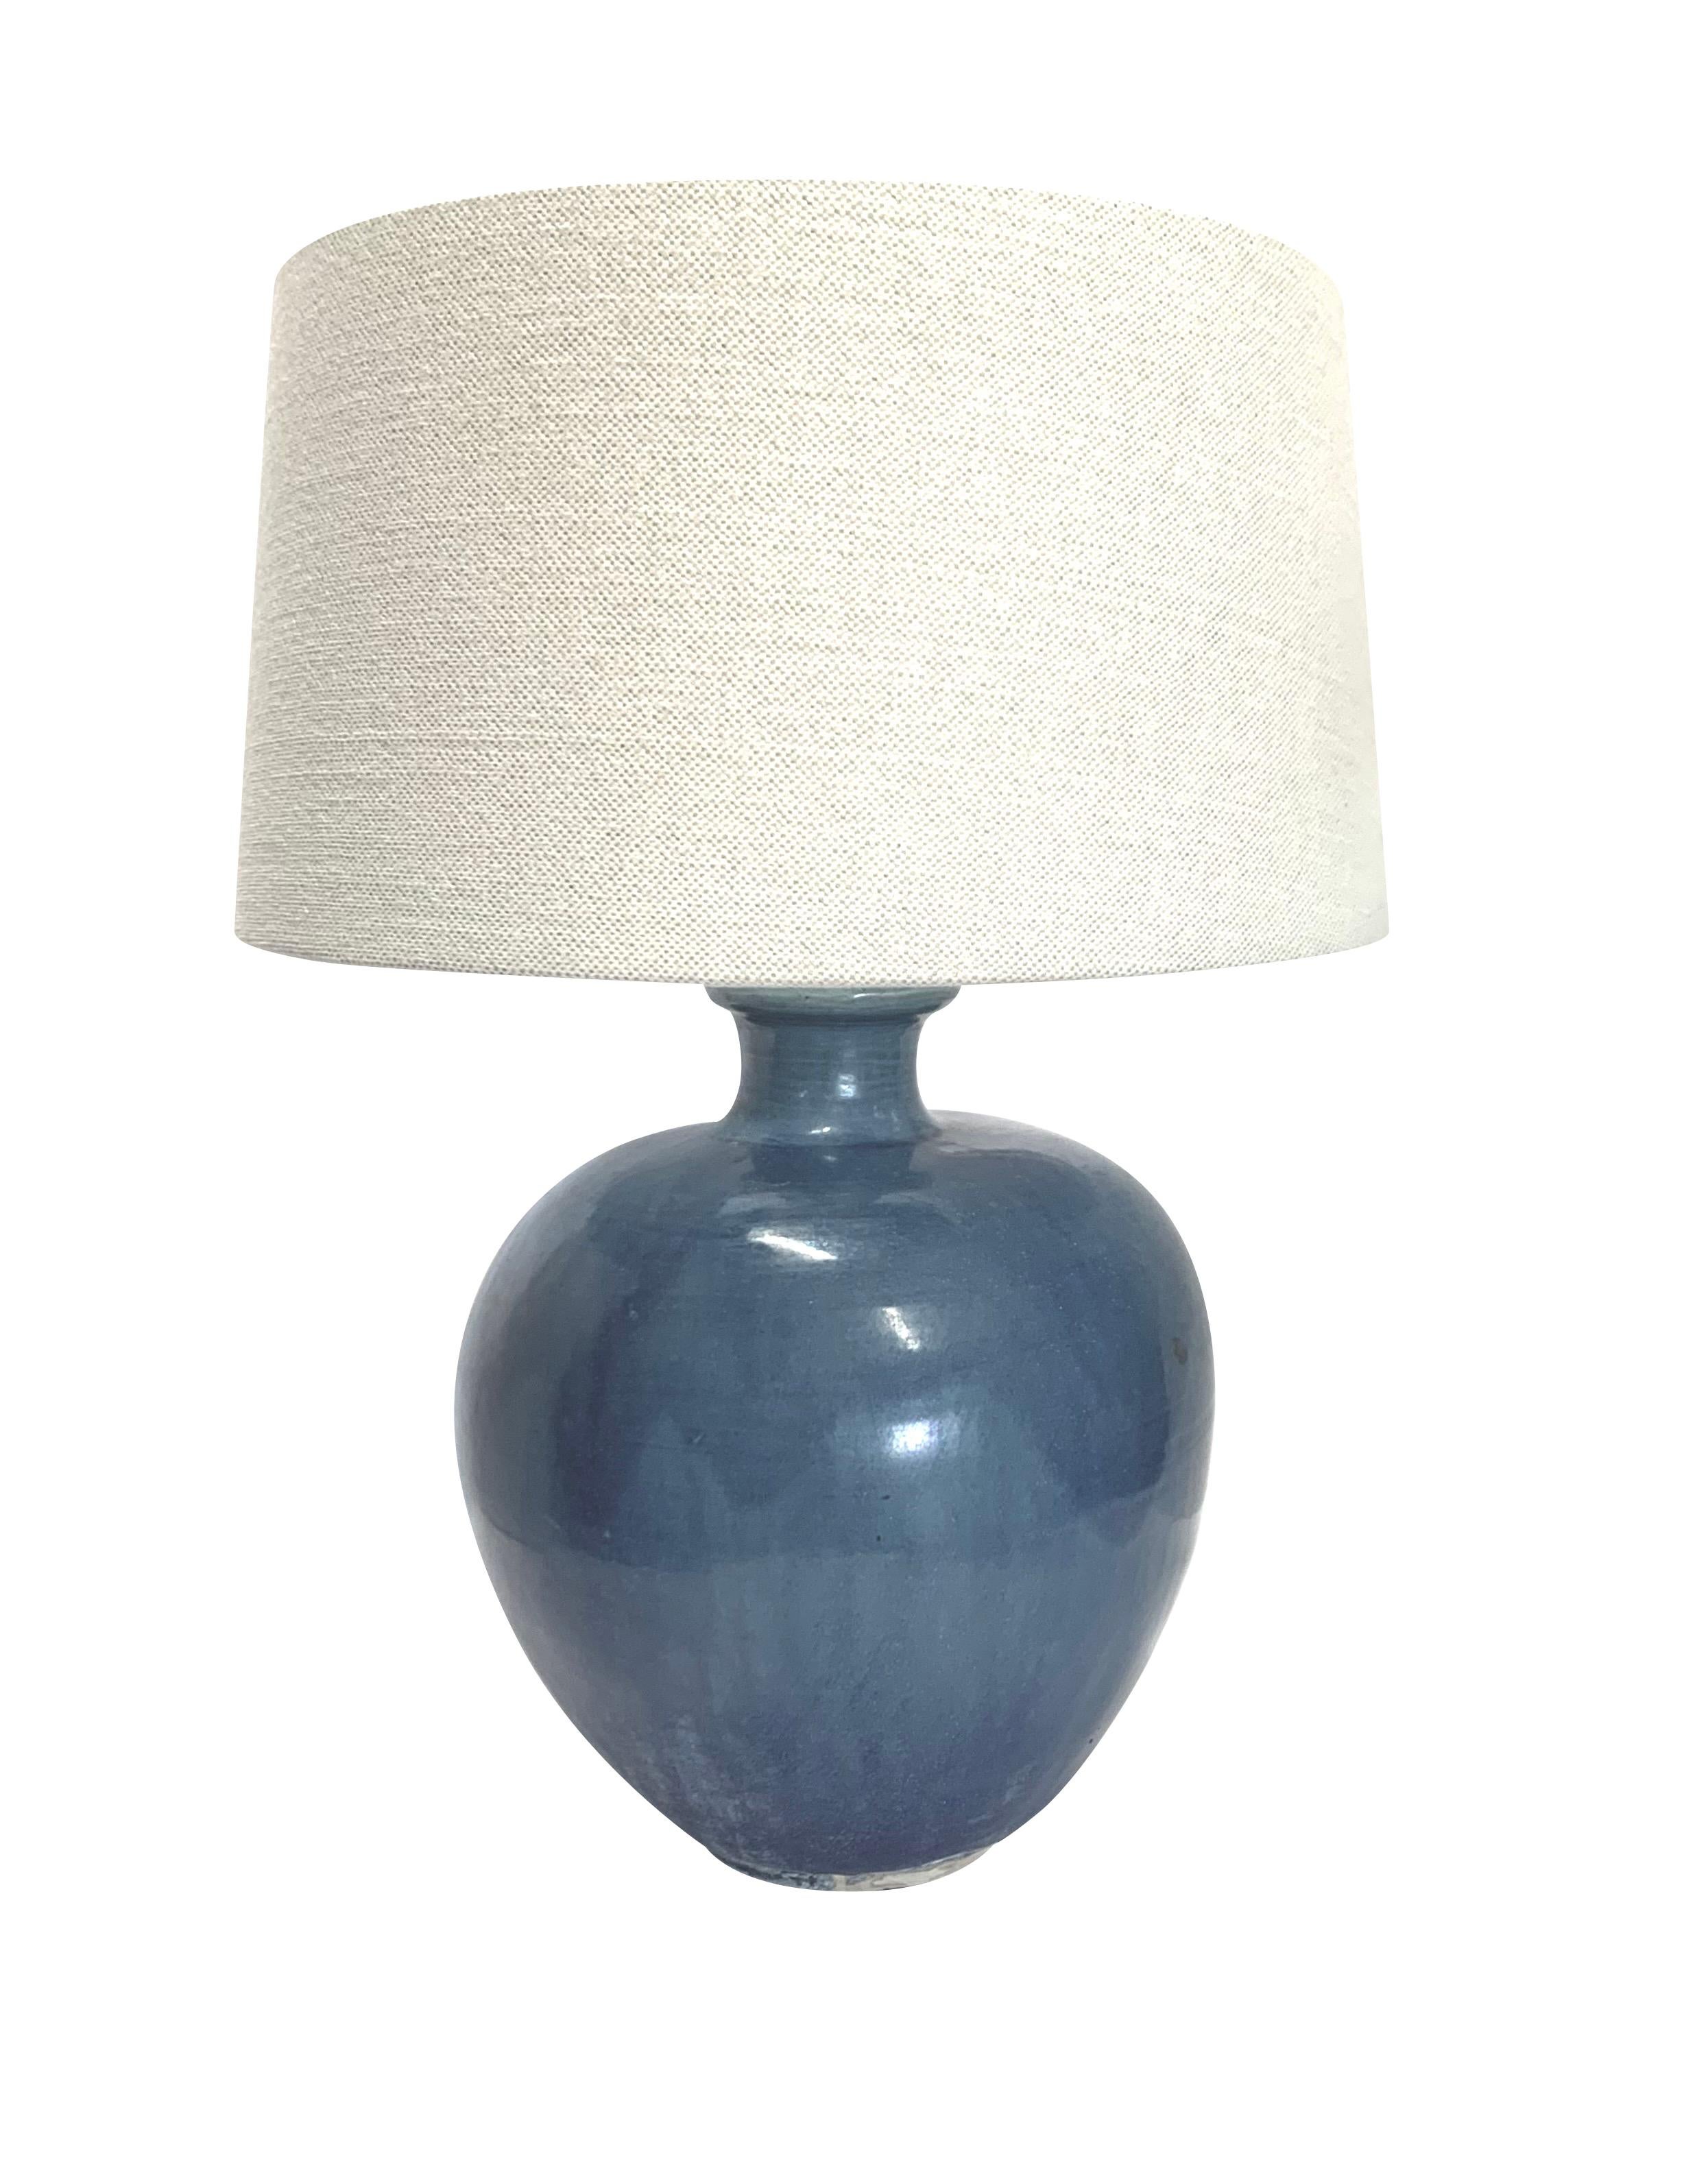 Contemporary Chinese pair deep blue glazed lamps.
Thin spout top with rounded base.
Also available as vases S5752
Belgian linen shades
Base measures 9